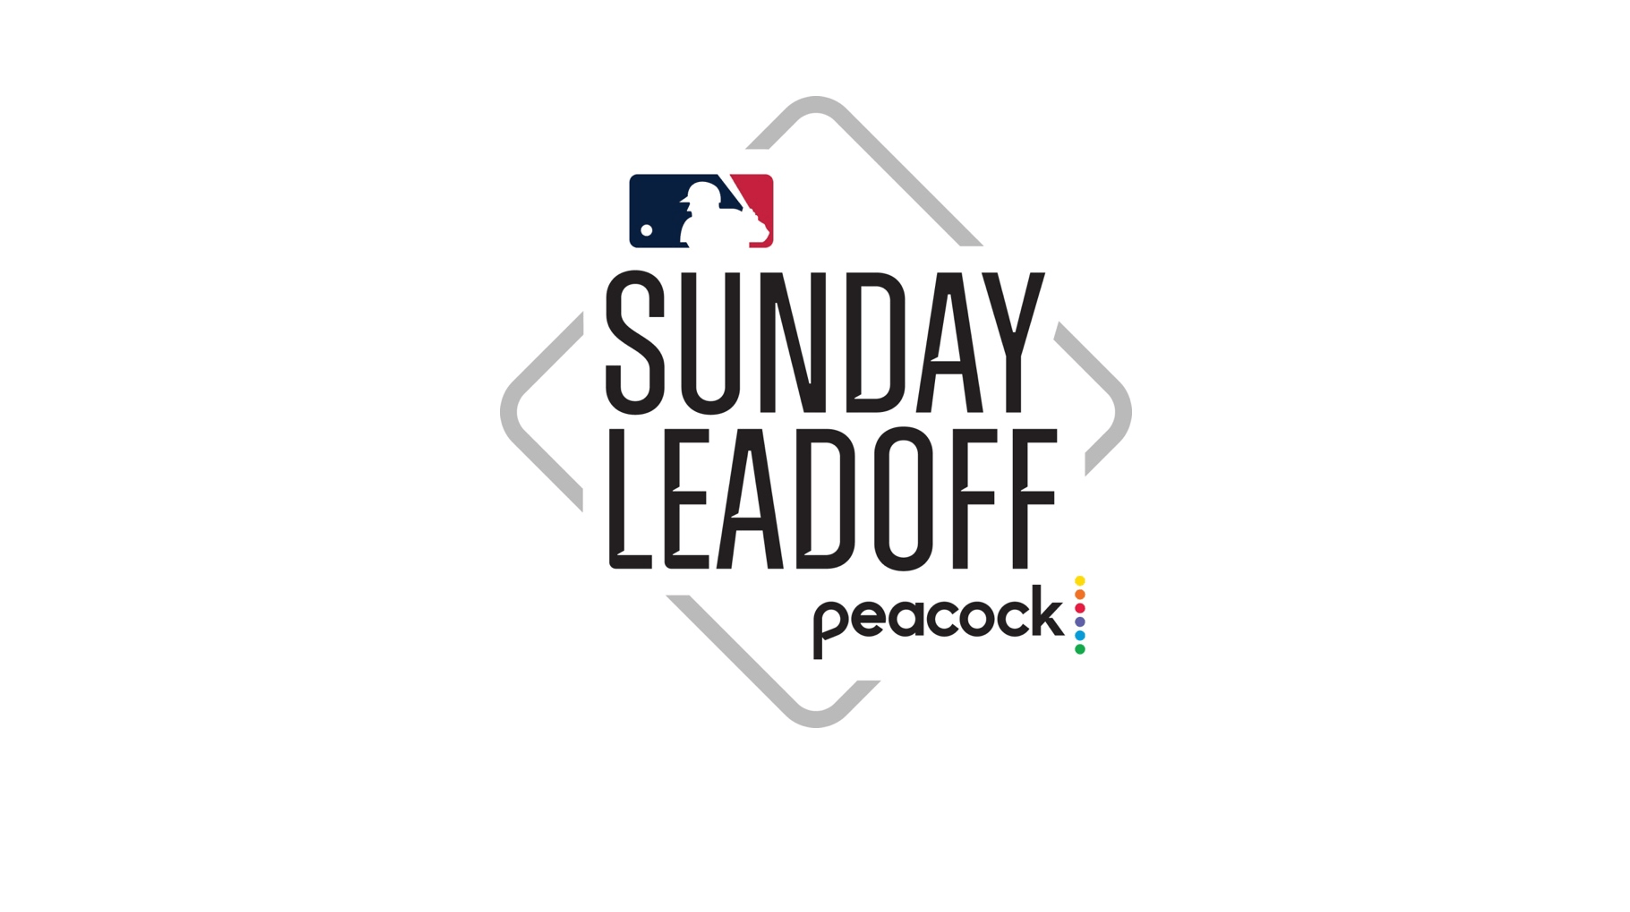 “MLB Sunday Leadoff” Will Be the Name of Peacock & NBC Sports Sunday Morning MLB Package